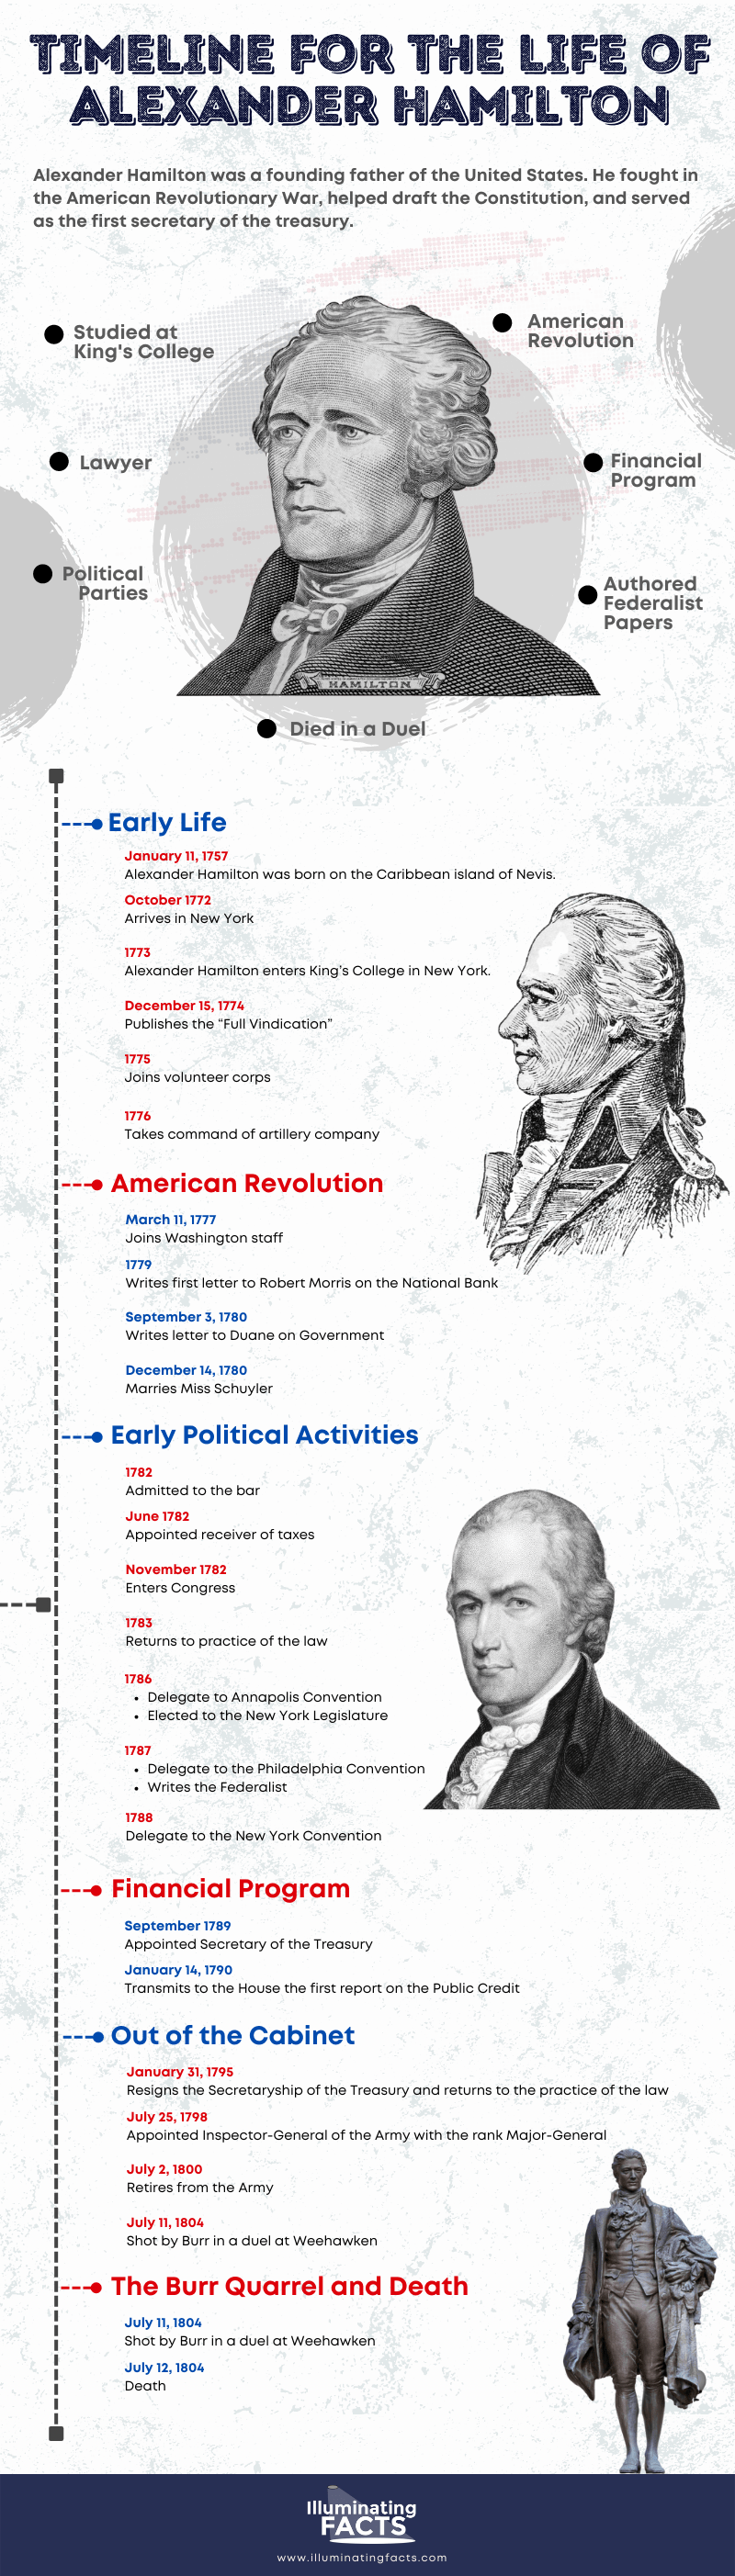 Timeline-for-the-Life-of-Alexander-Hamilton